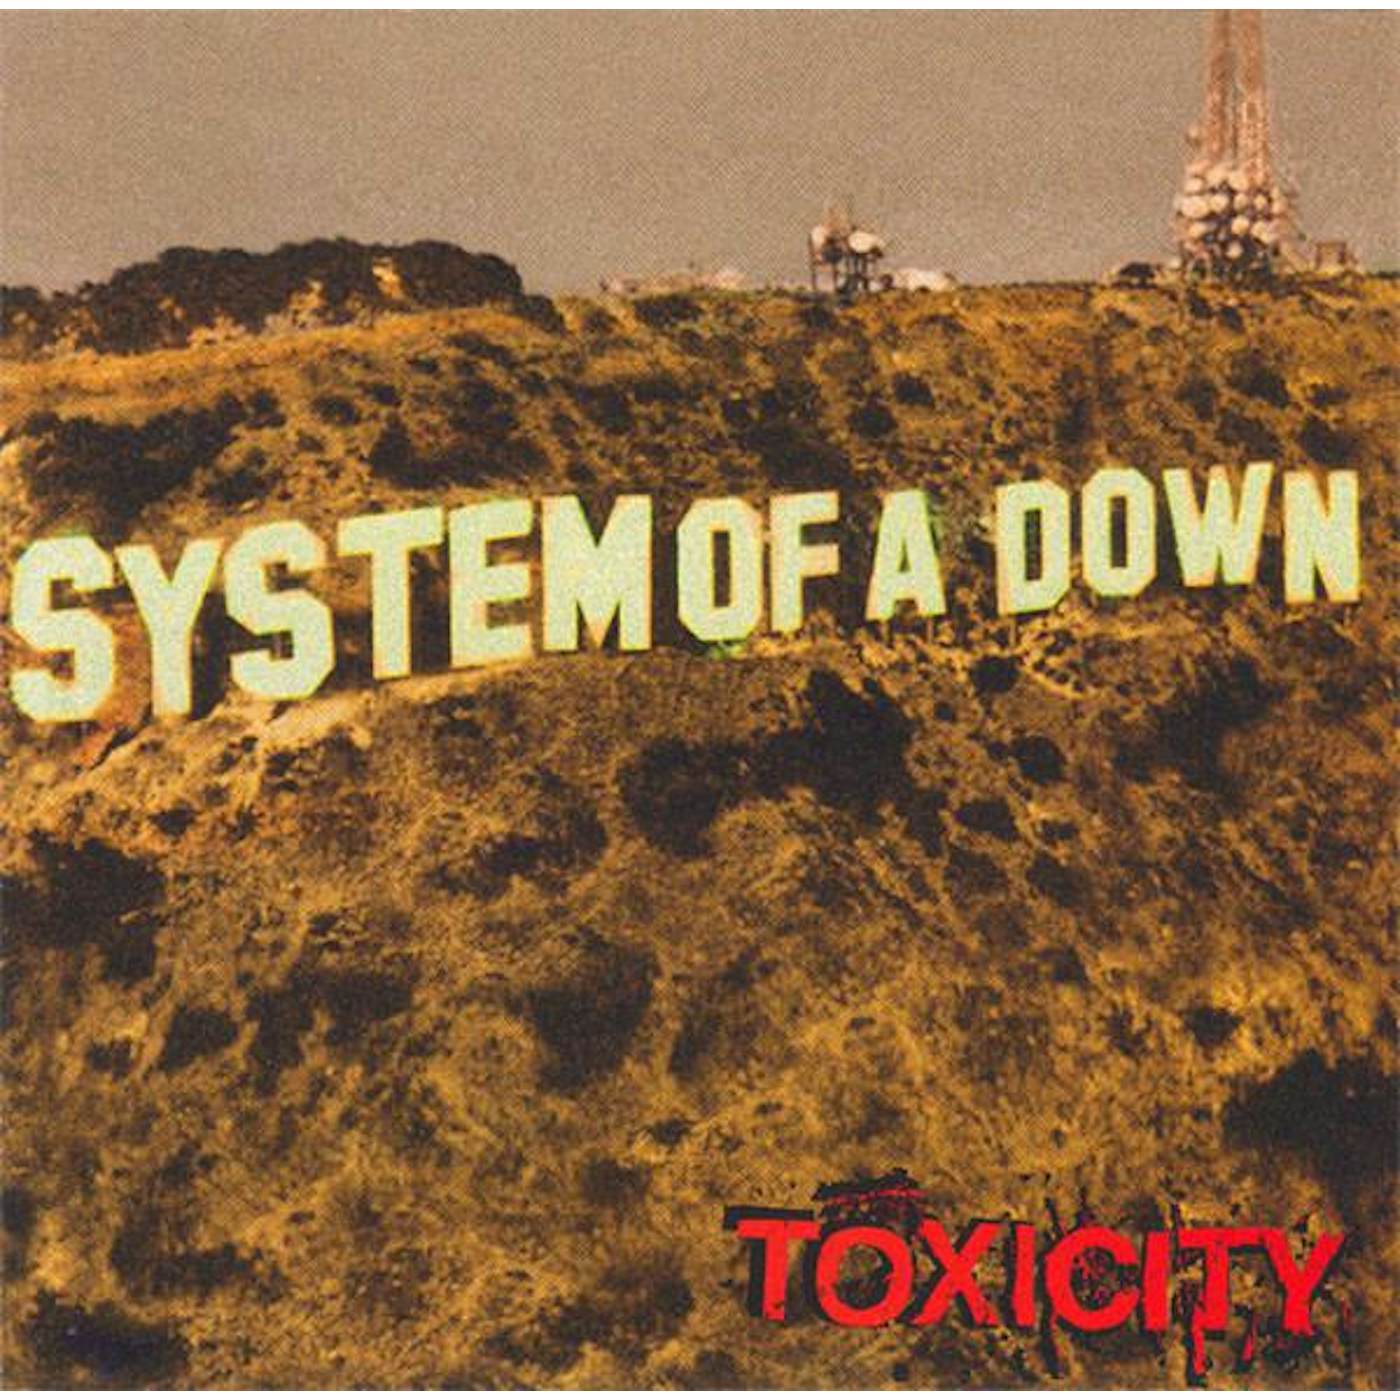 System Of A Down TOXICITY CD